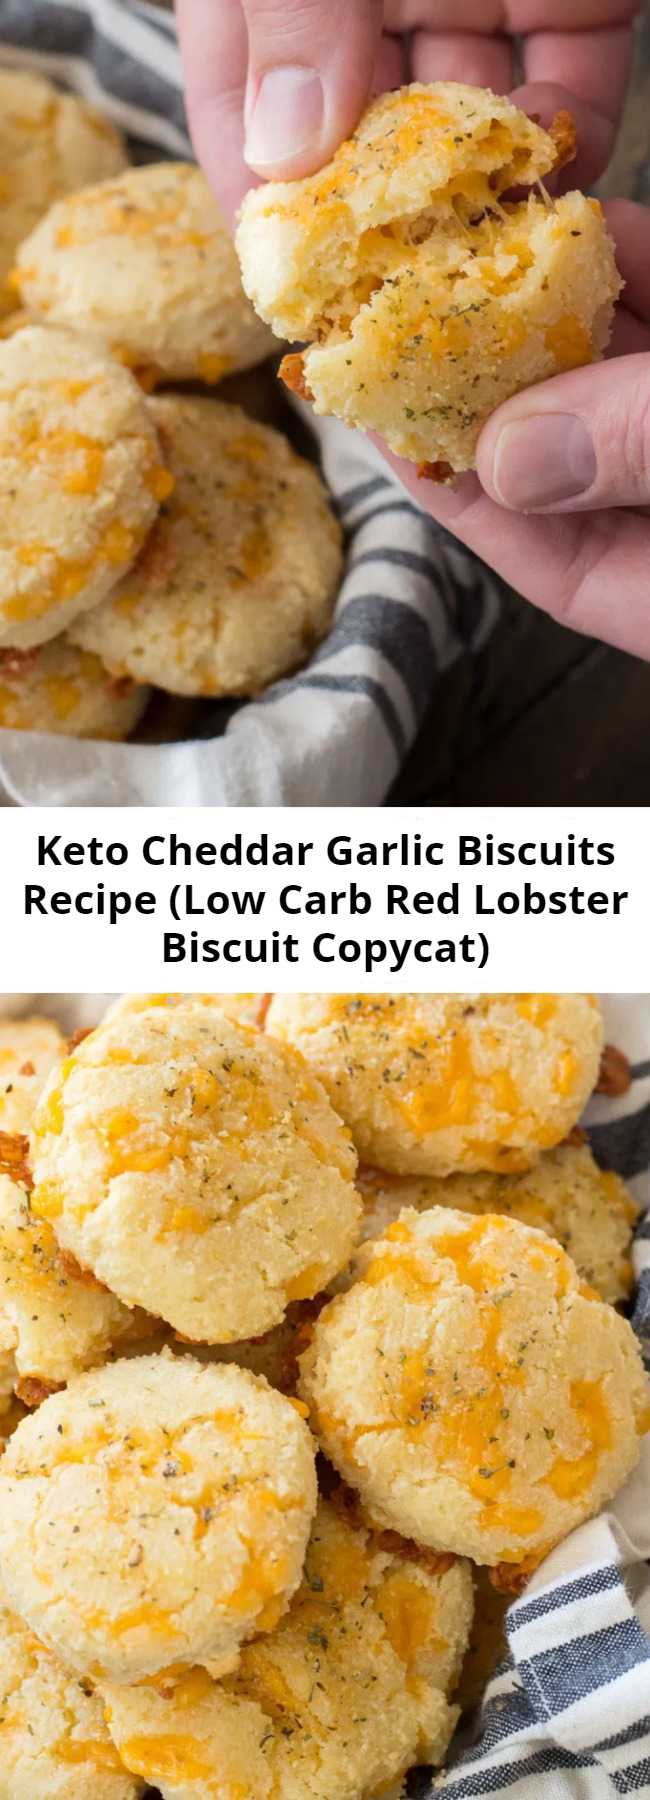 Keto Cheddar Garlic Biscuits Recipe (Low Carb Red Lobster Biscuit Copycat) - You will love these easy Keto Cheddar Garlic Biscuits they are a perfect Low Carb Red Lobster Biscuit Copycat! Only 2 net carbs each and loaded with flavor! #keto